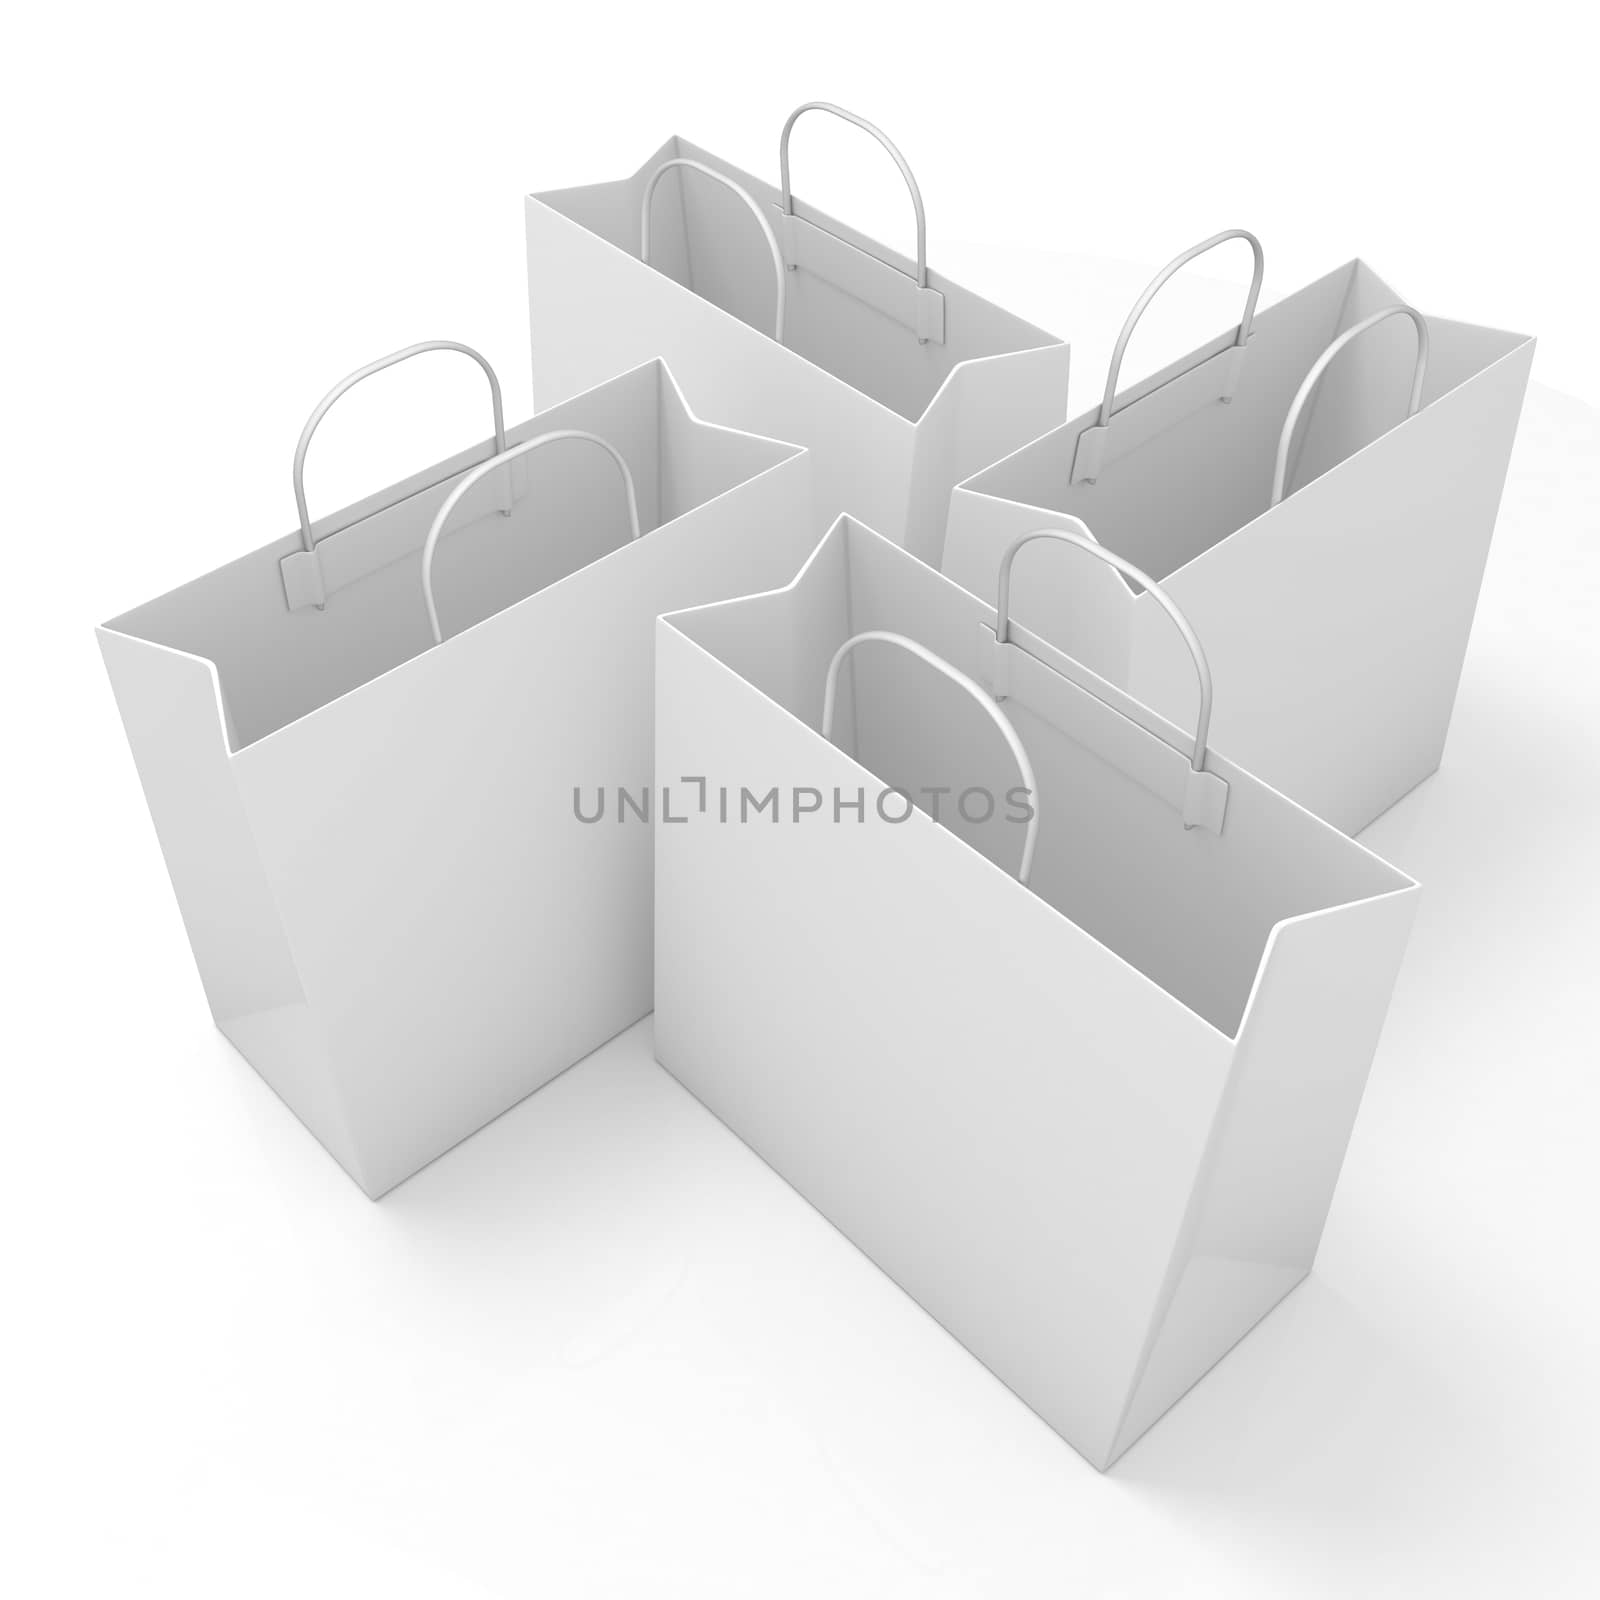 Empty paper bags, arranged by djmilic